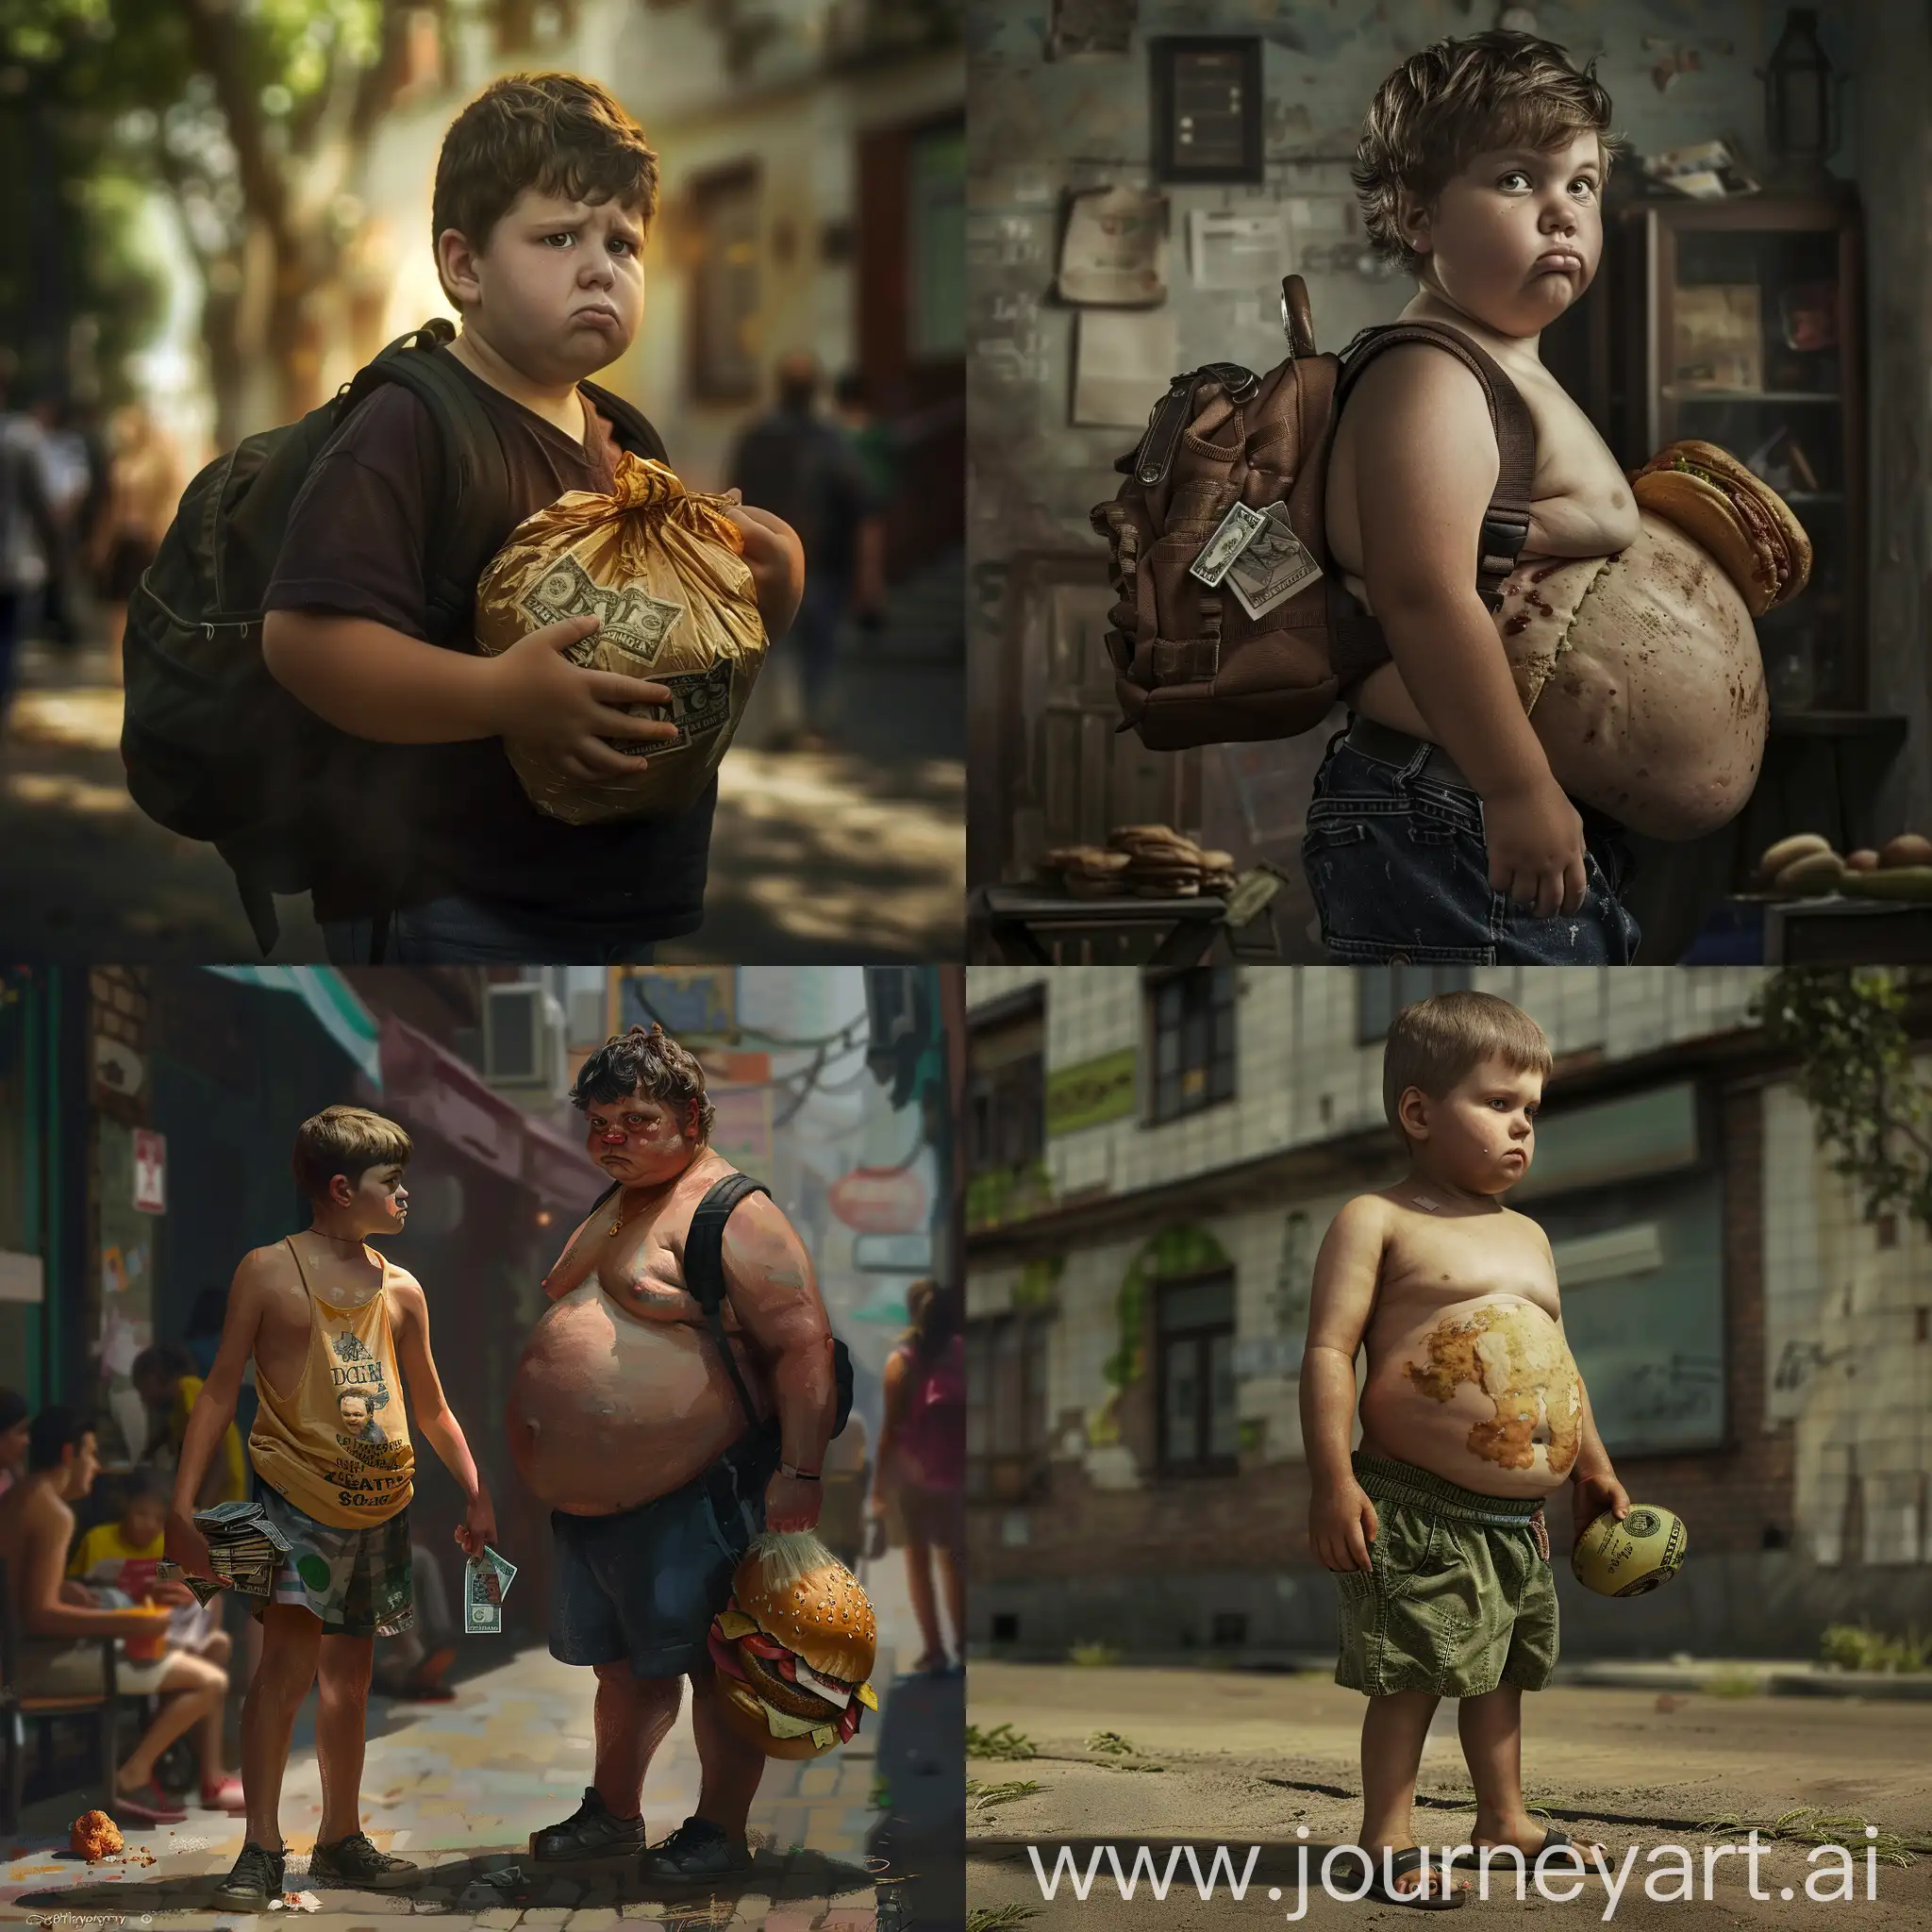 fat child robbed for lunch money - realistic